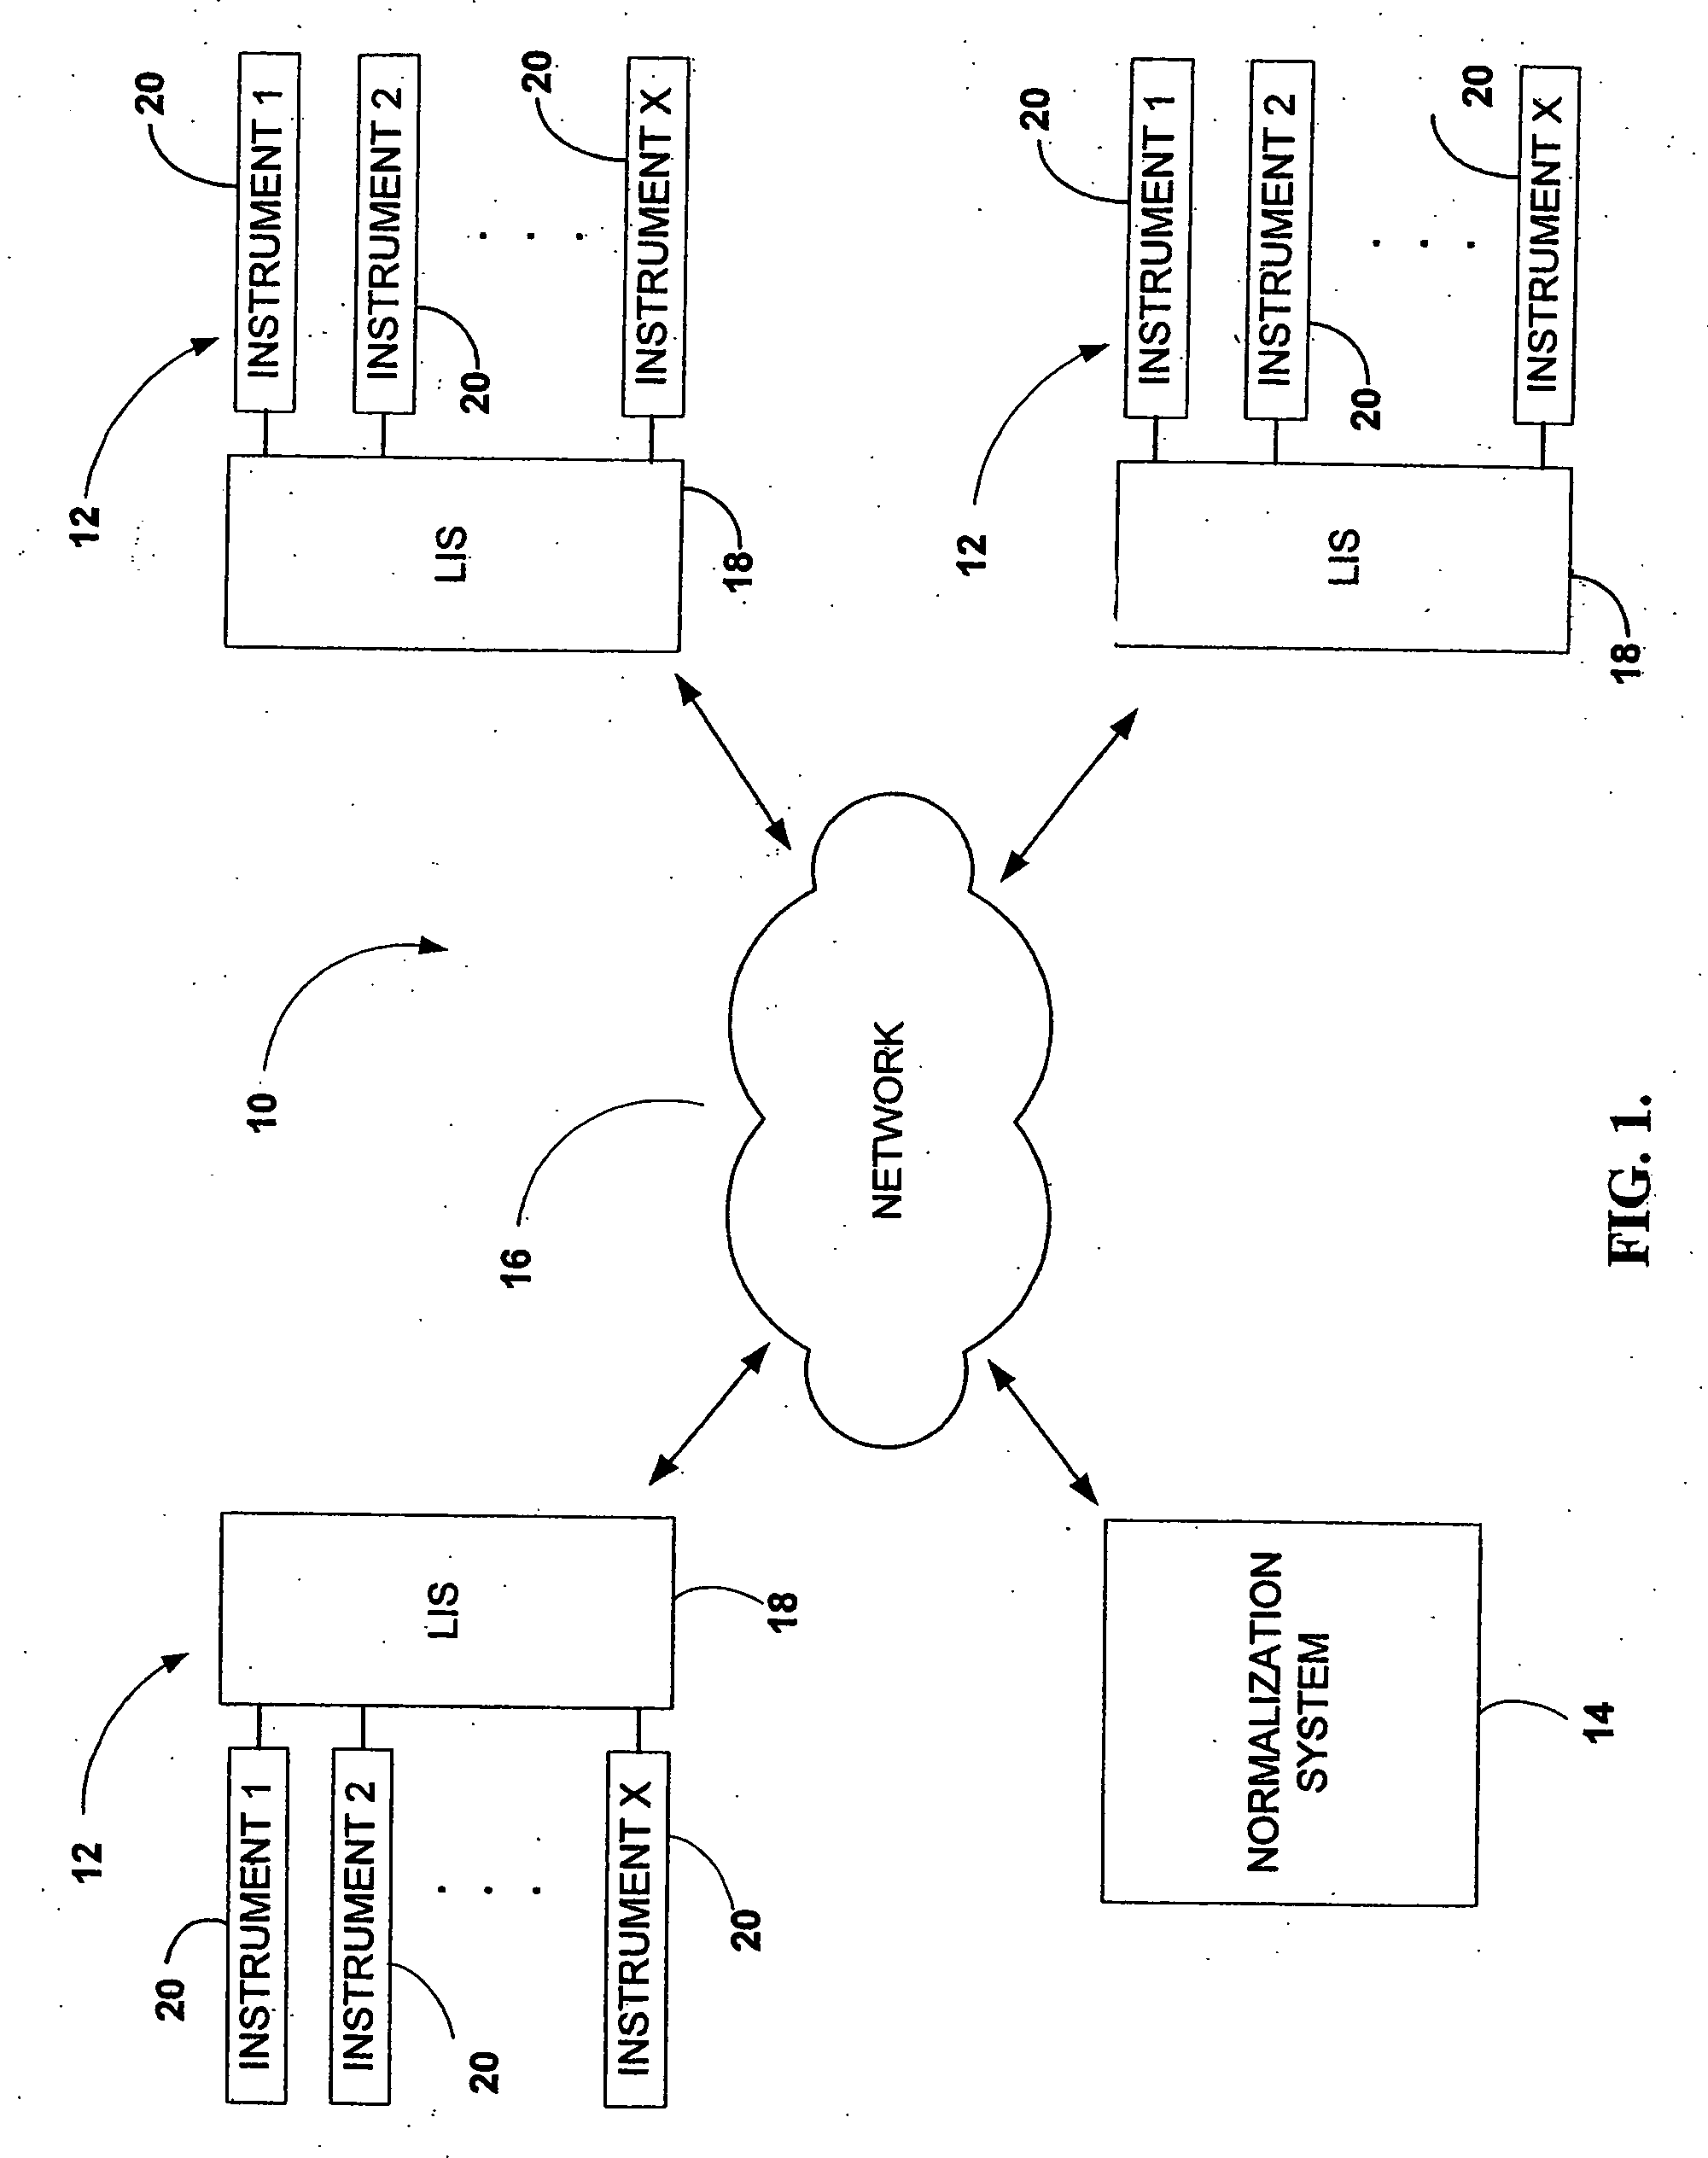 Method and structure for mitigating instrumentation differences